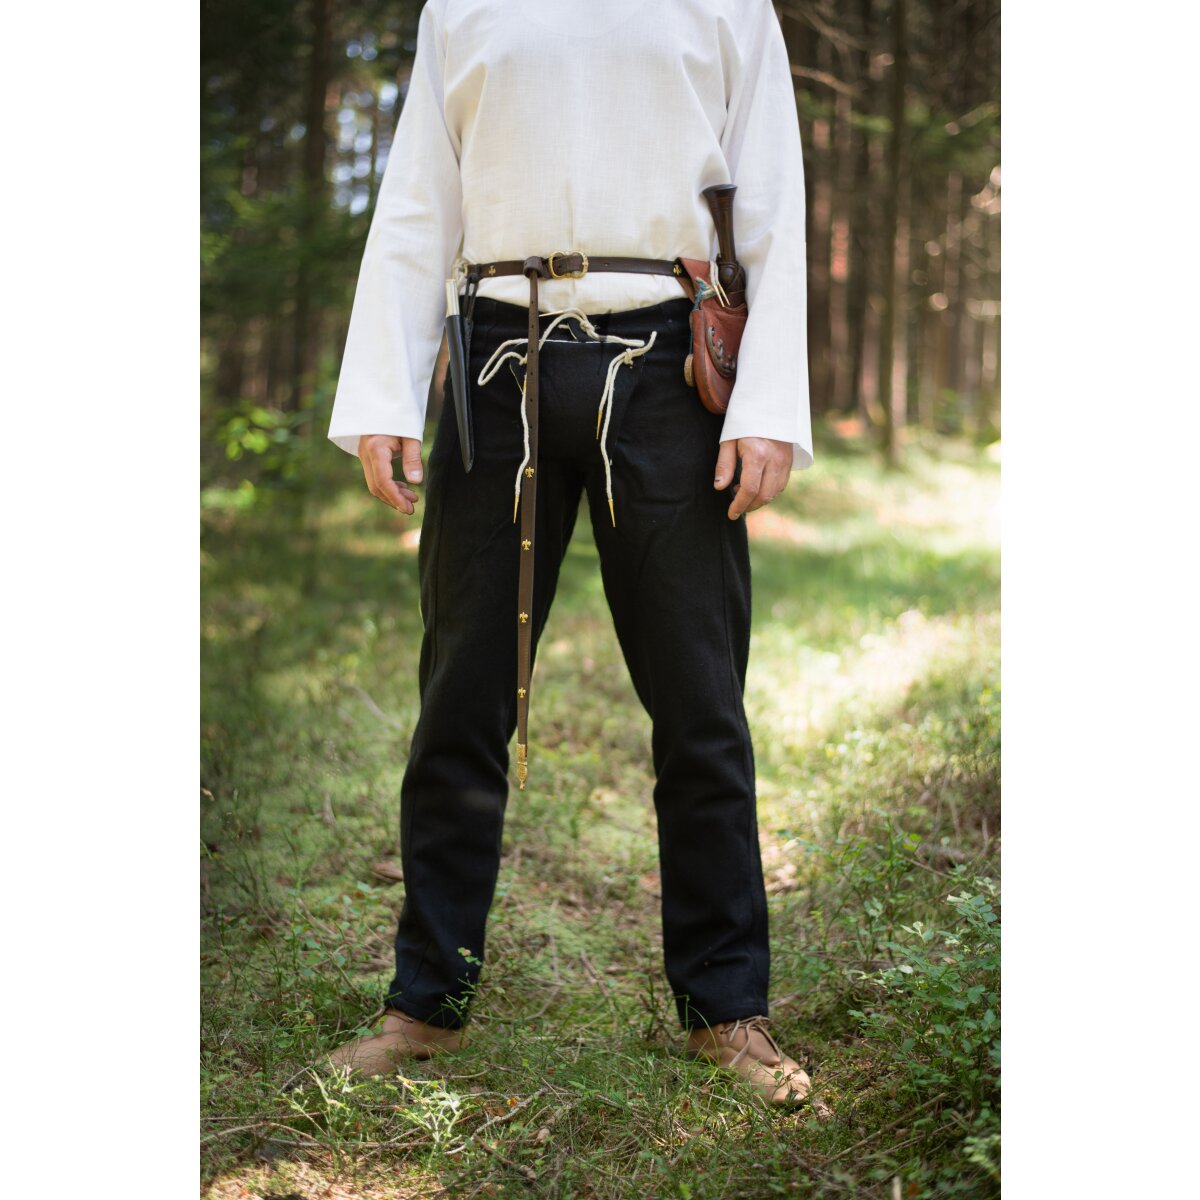 Late medieval pants 14th-15th black, € 64,00 century